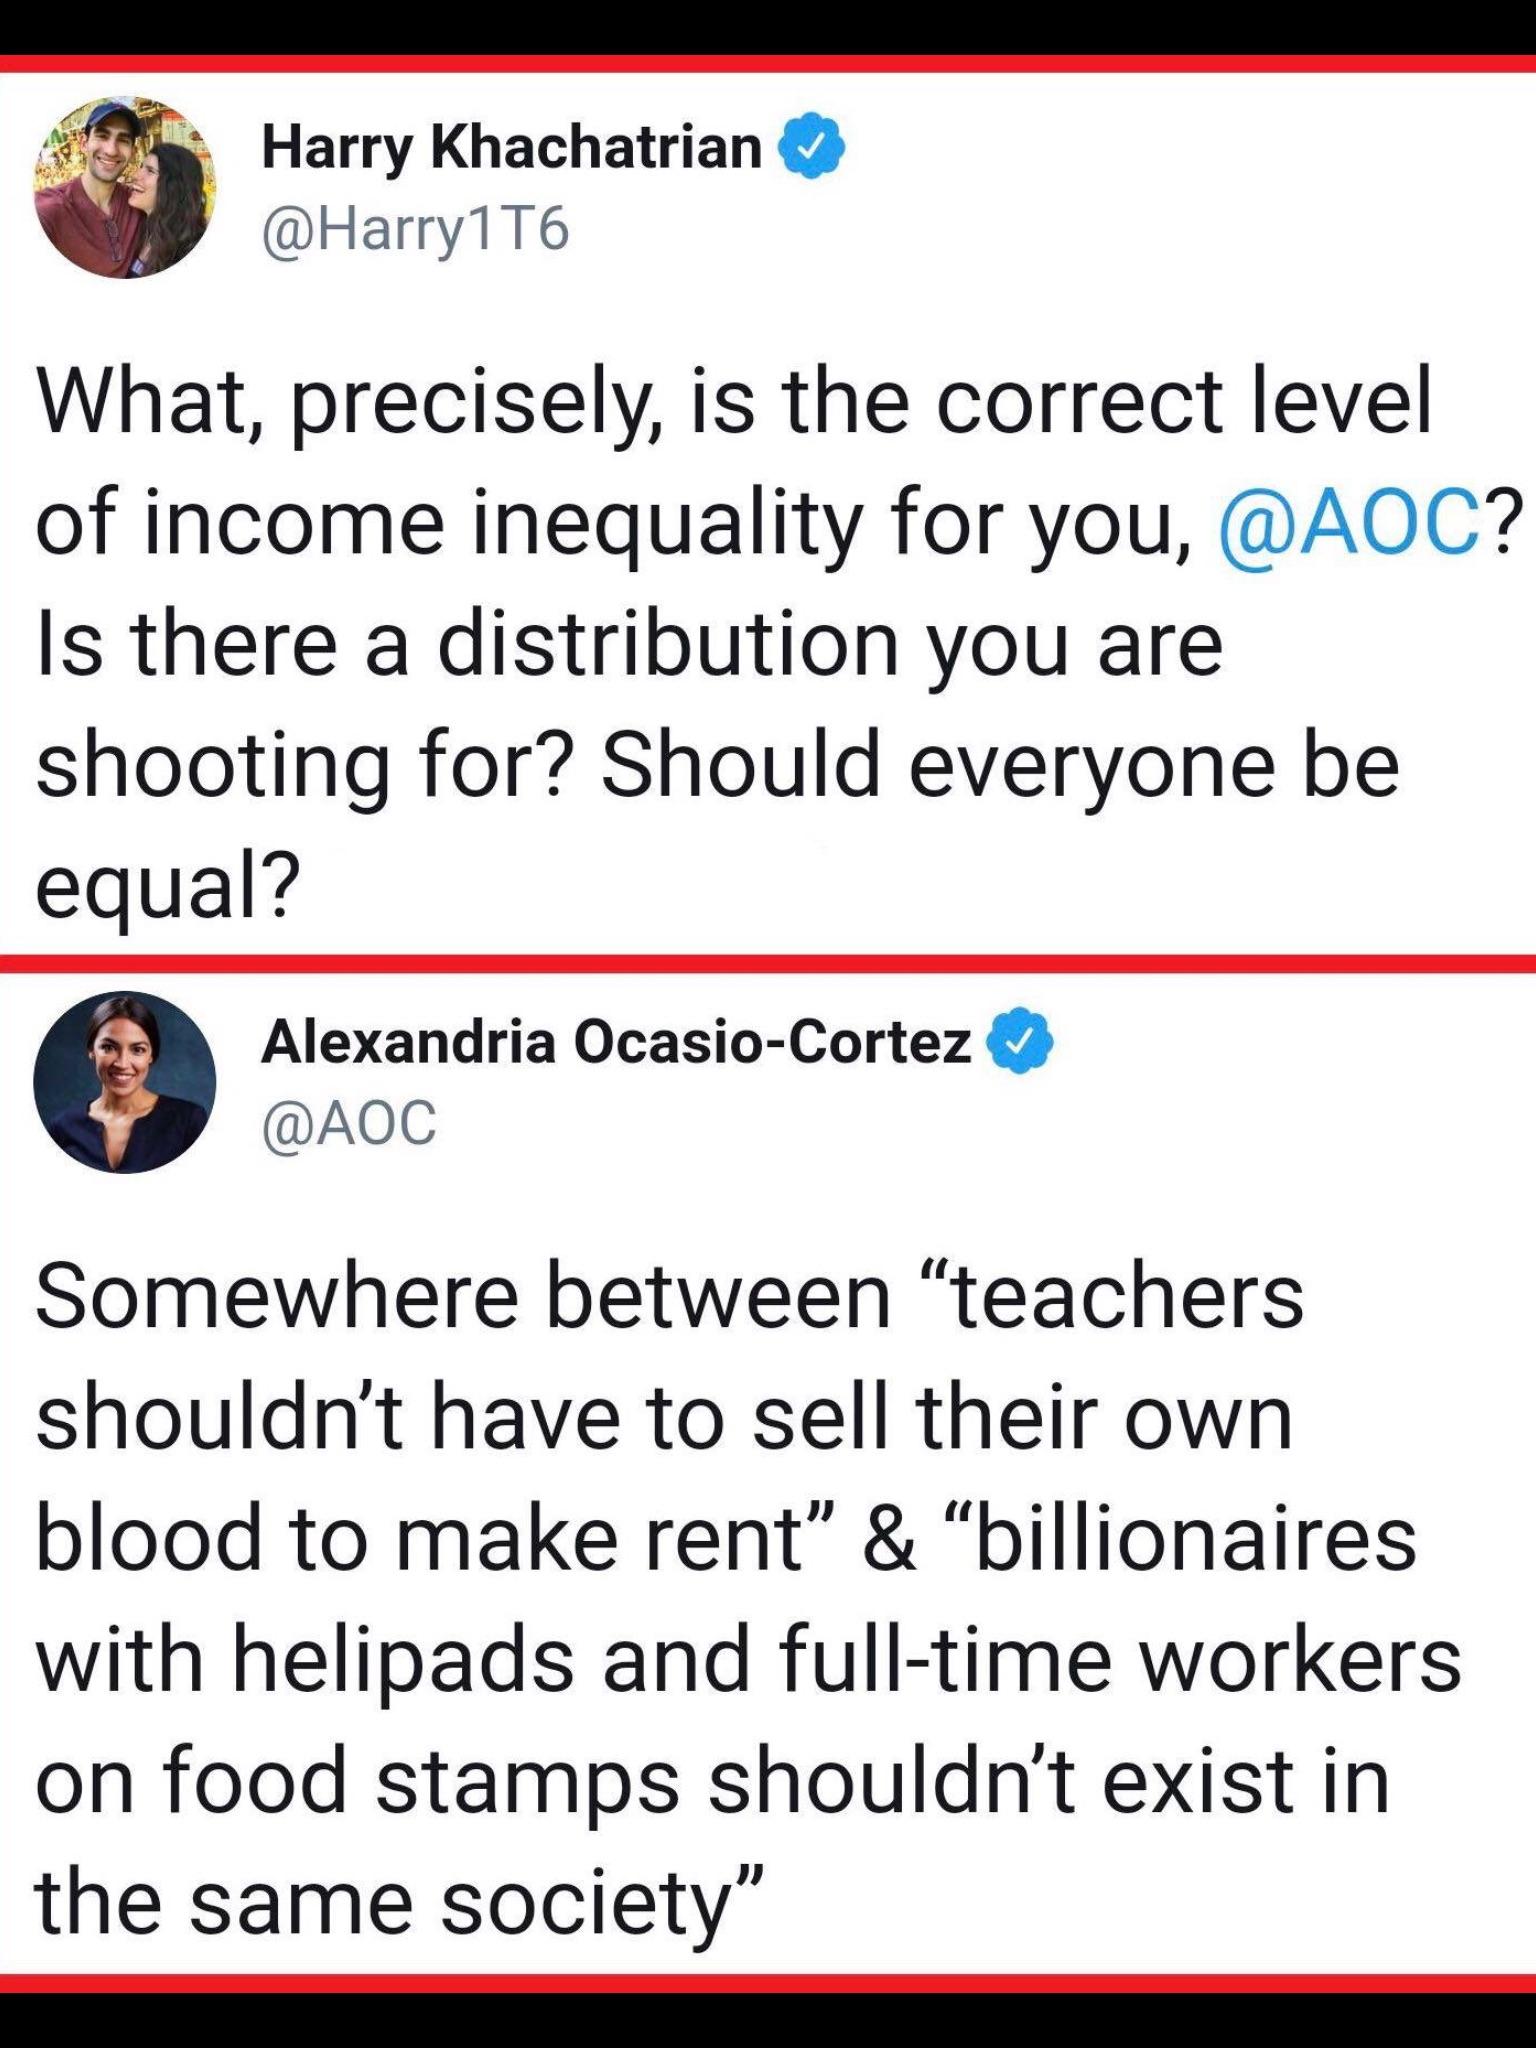 political political-memes political text: Harry Khachatrian @Harry1T6 What, precisely, is the correct level of income inequality for you, @AOC Is there a distribution you are shooting for? Should everyone be equal? o Alexandria Ocasio-Cortez @AOC between 